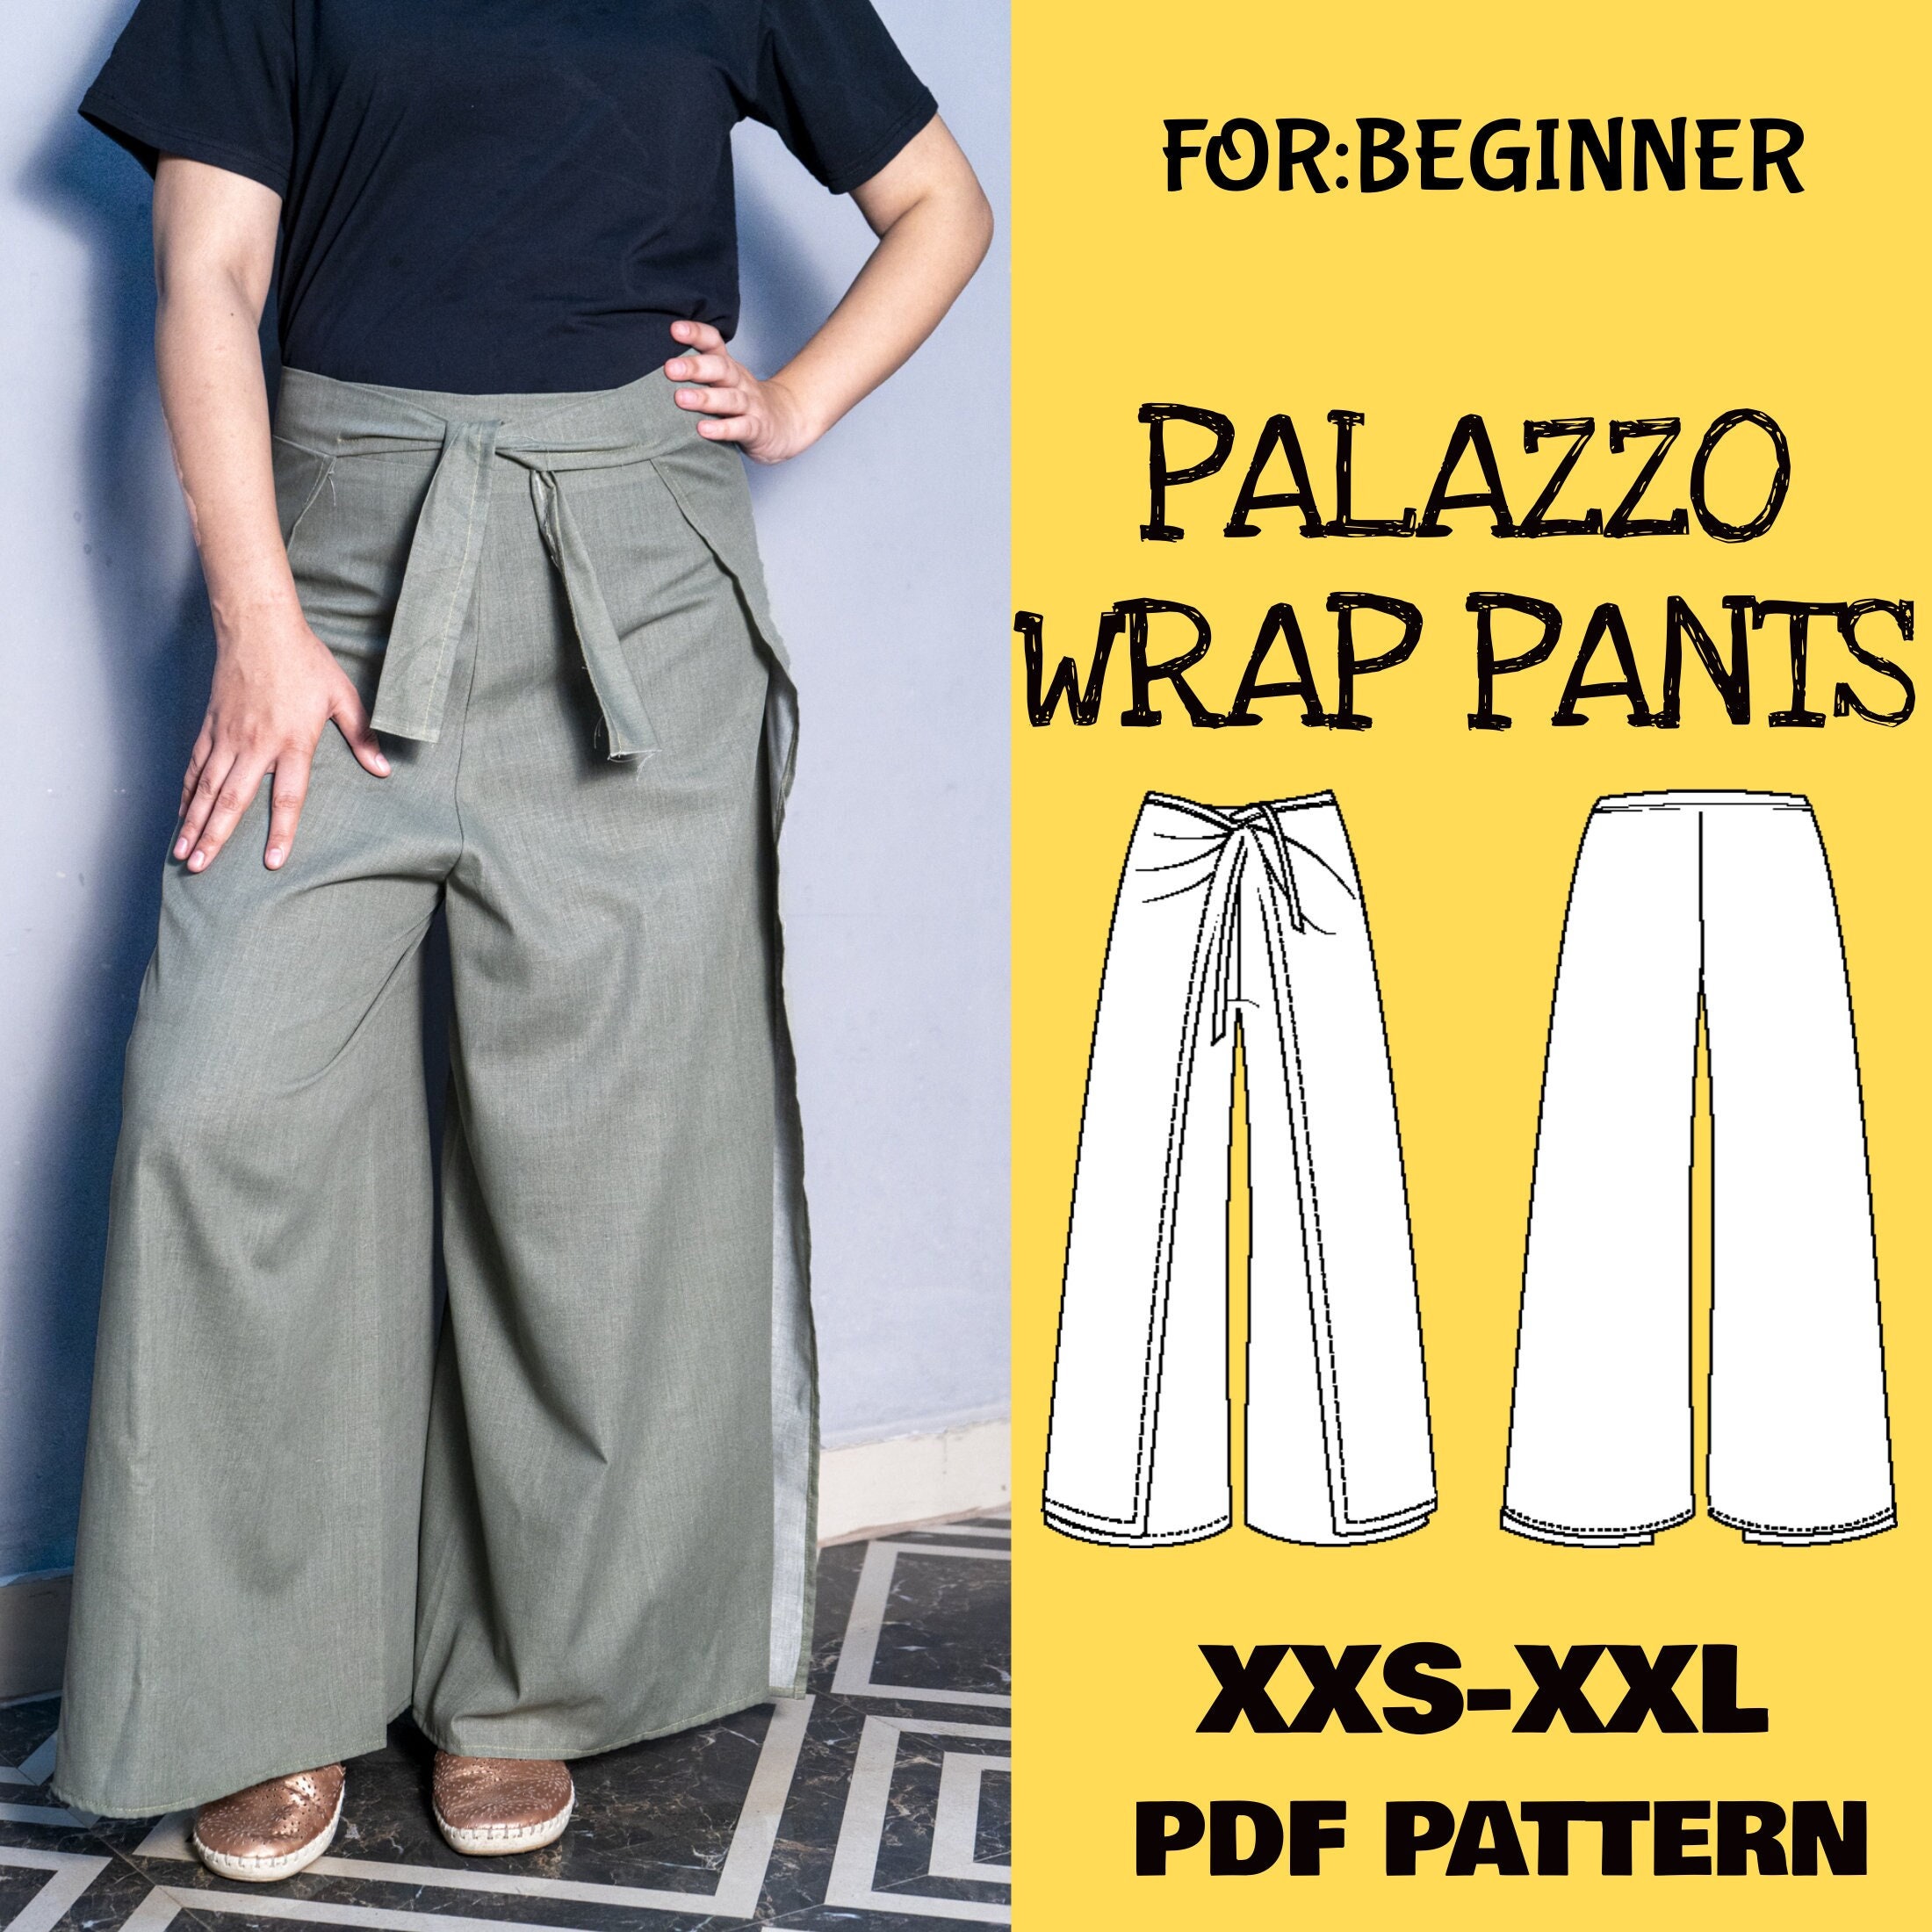 DIY Super Easy Summer Wrap Pants / Wrap Pants cutting And Stitching DIY 